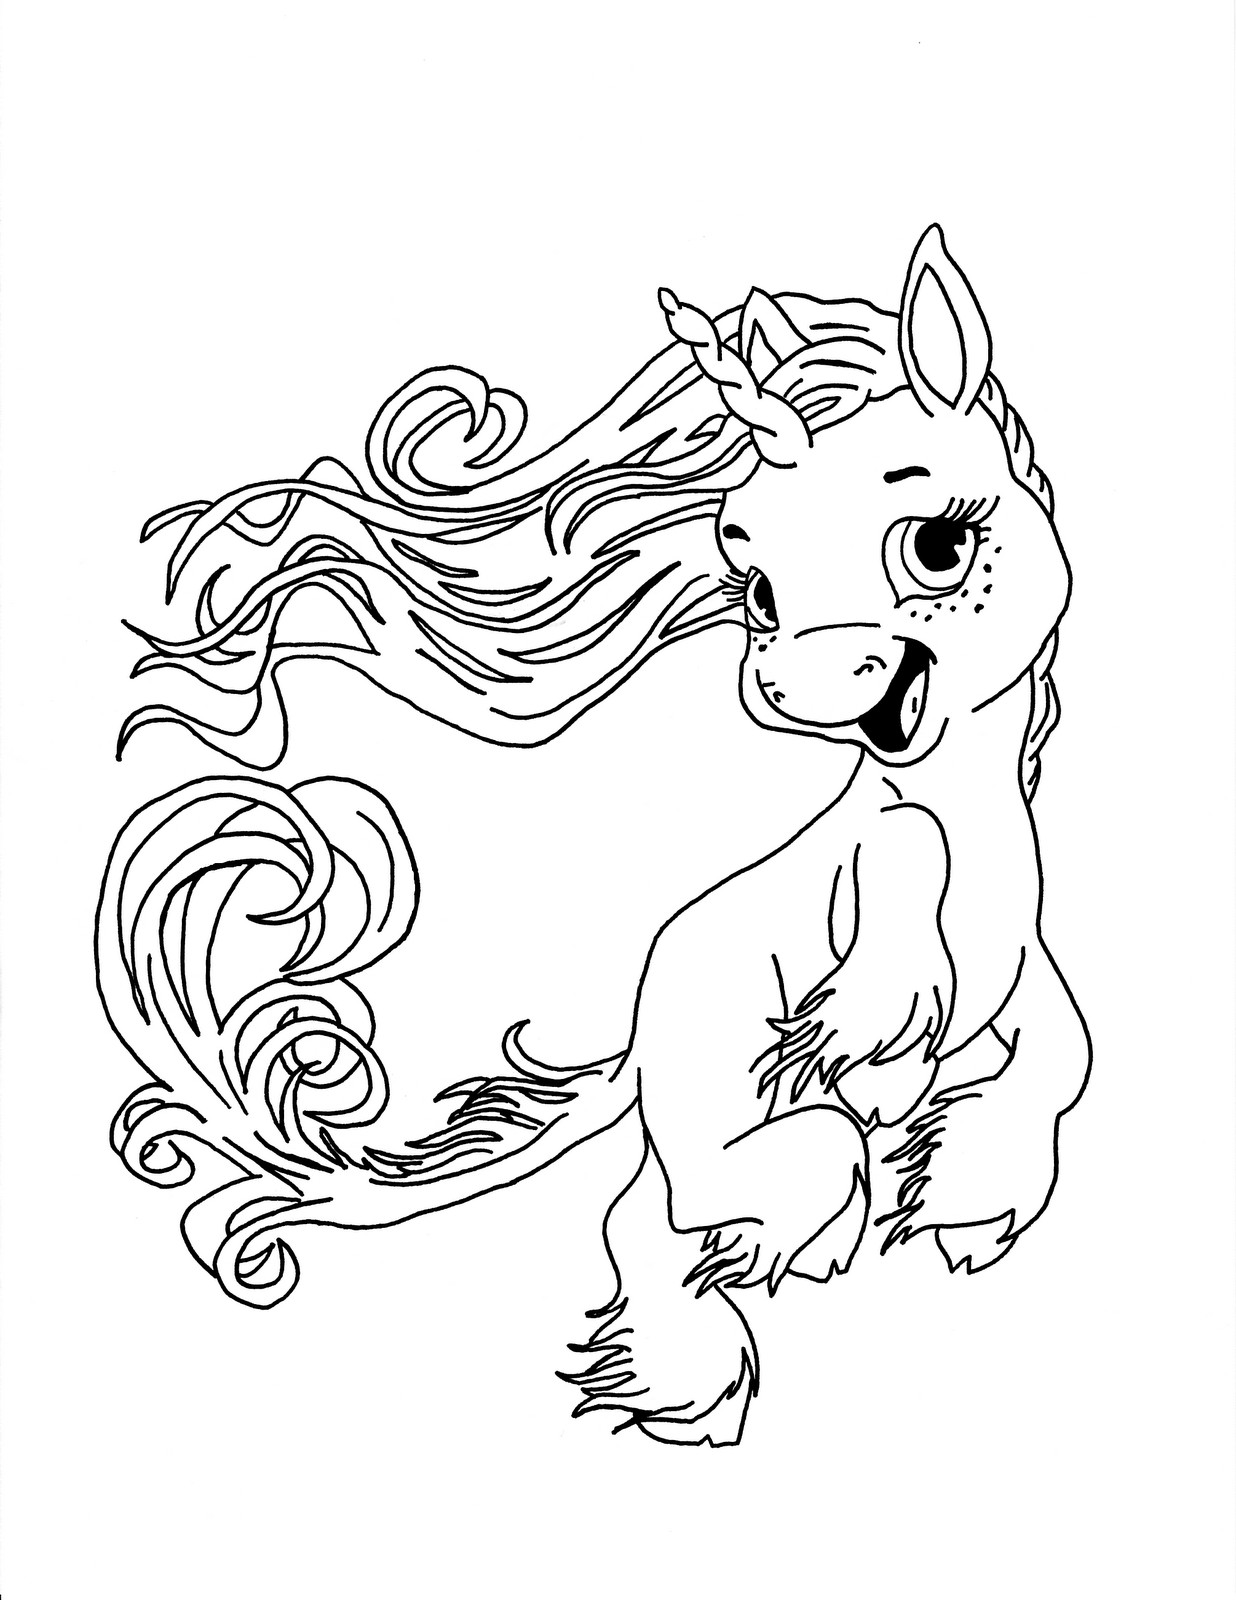 Unicorns Coloring Pages For Kids
 Unicorn Coloring Pages coloringsuite